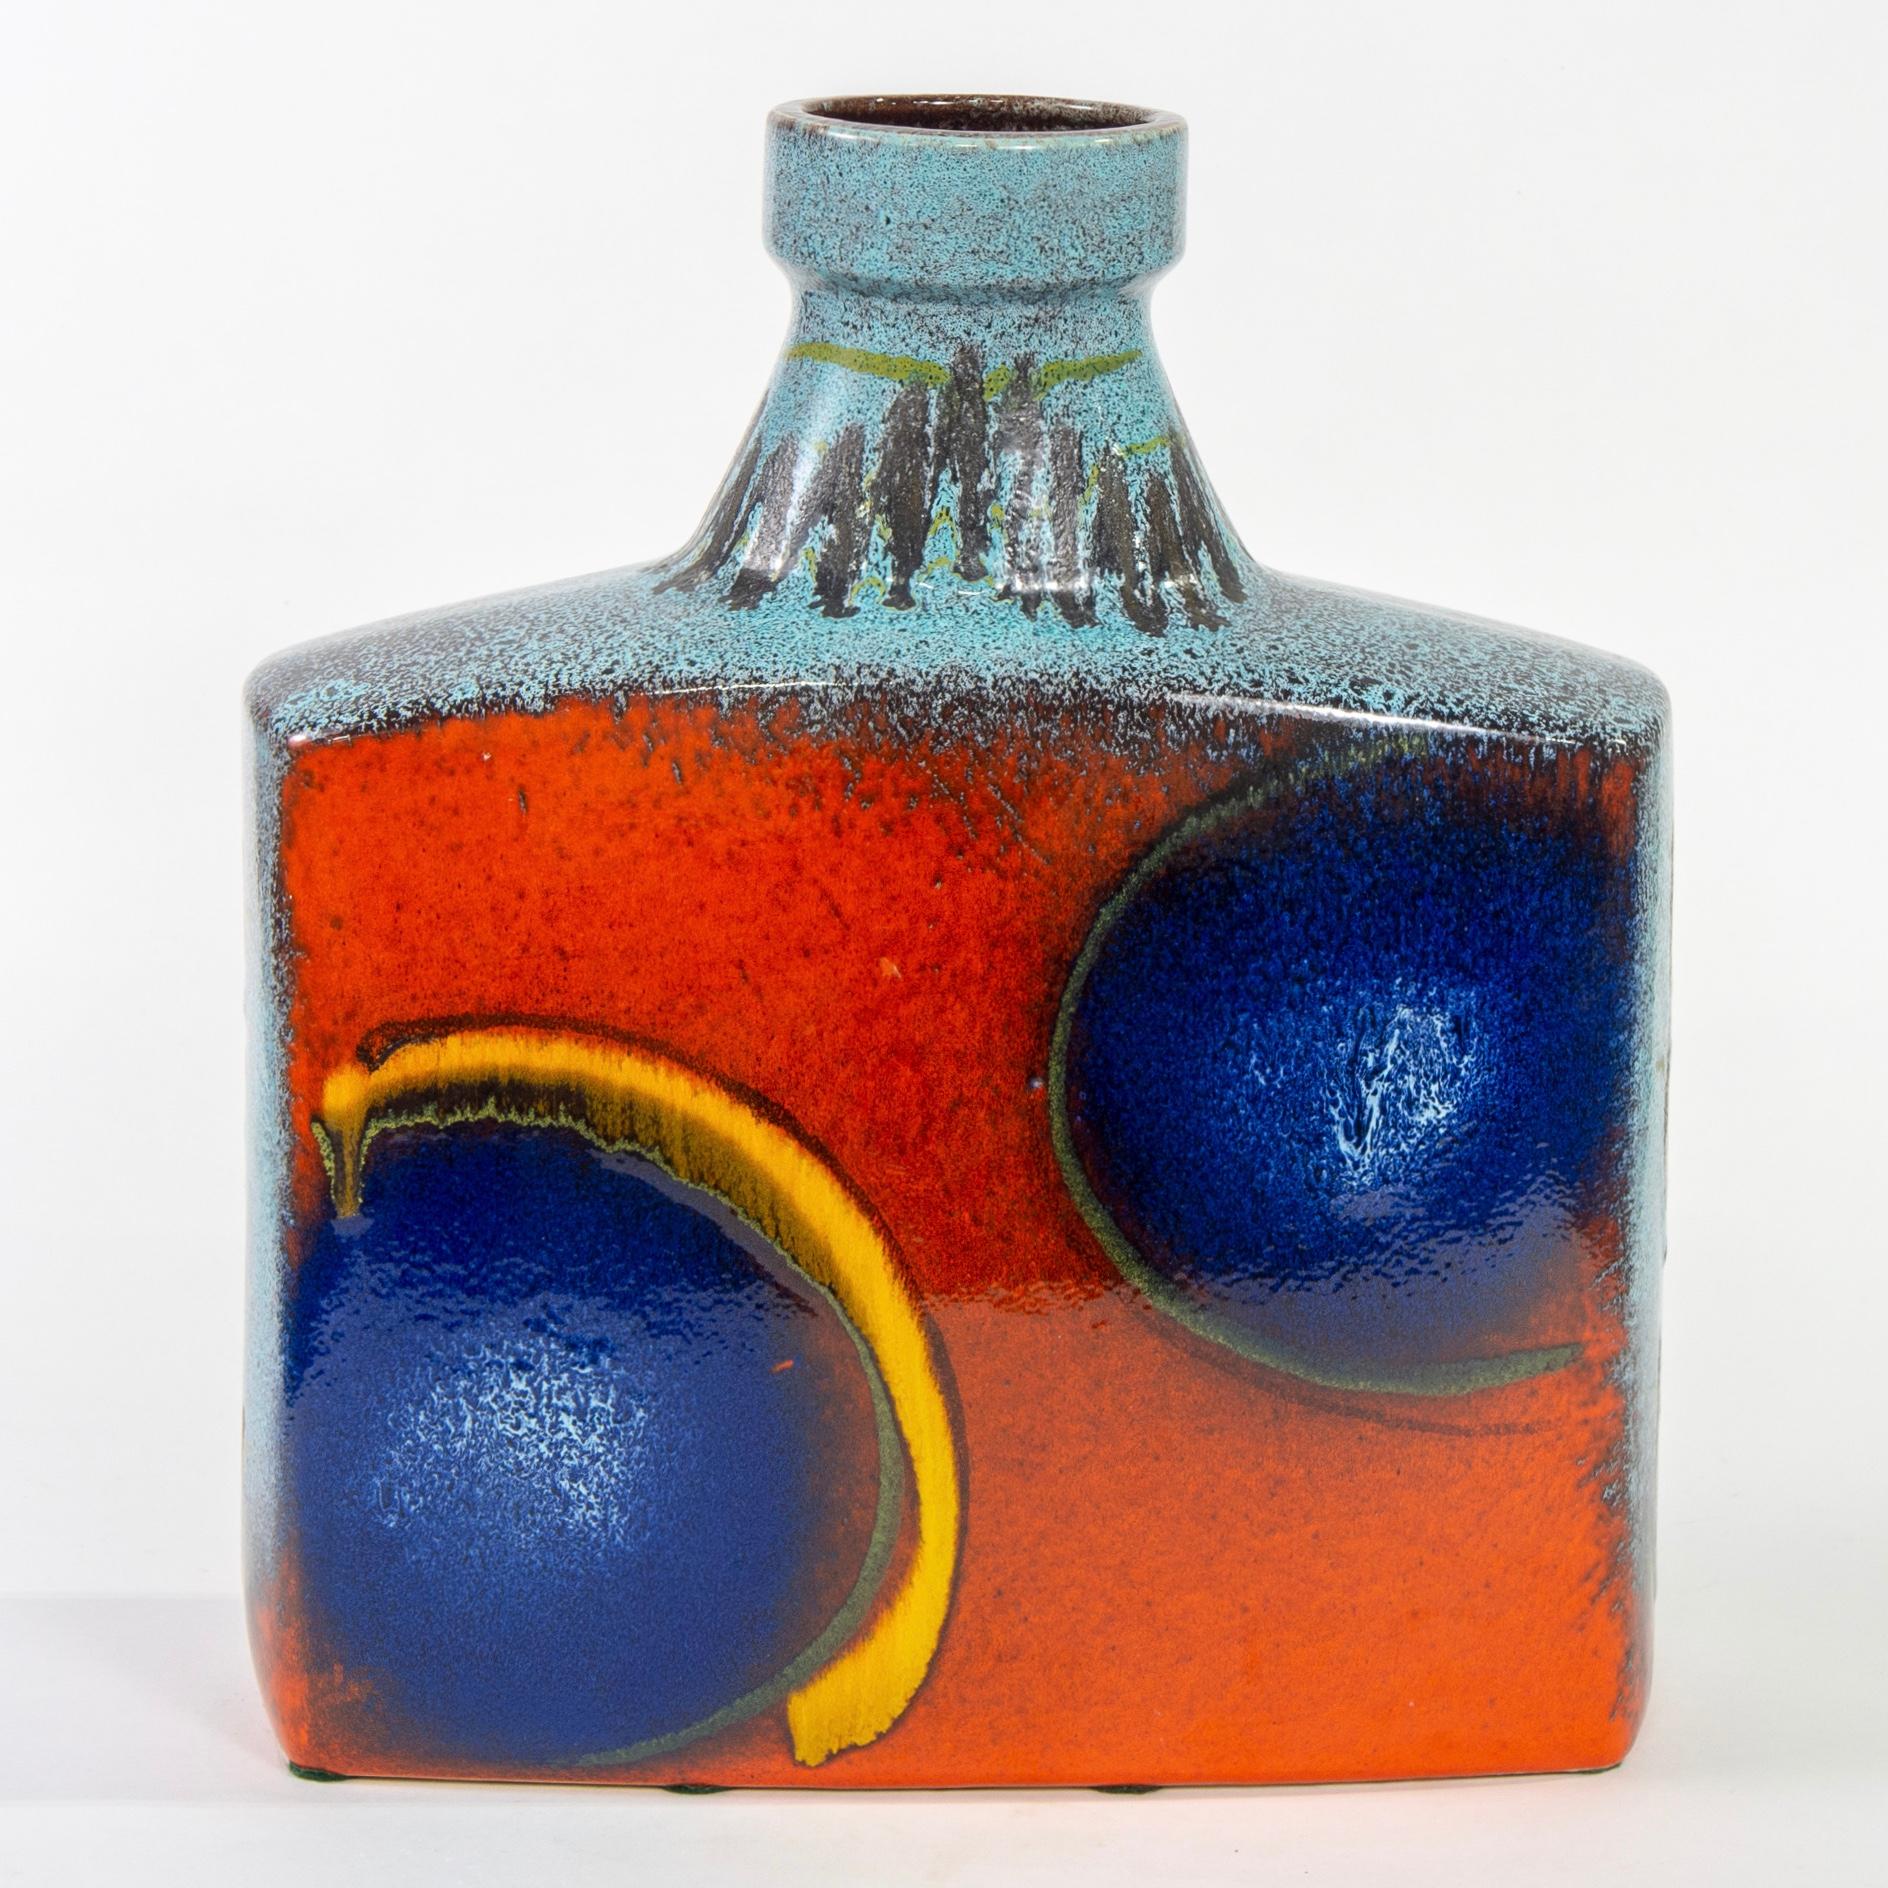 Extra large ceramic vase by Scheurich of W. Germany is marked 281-39, circa 1960s. Standing just under 16” tall, this vase has a flat, rectangular body, squat neck and colorful abstract glaze in fire orange, cobalt blue and aqua. Very good vintage